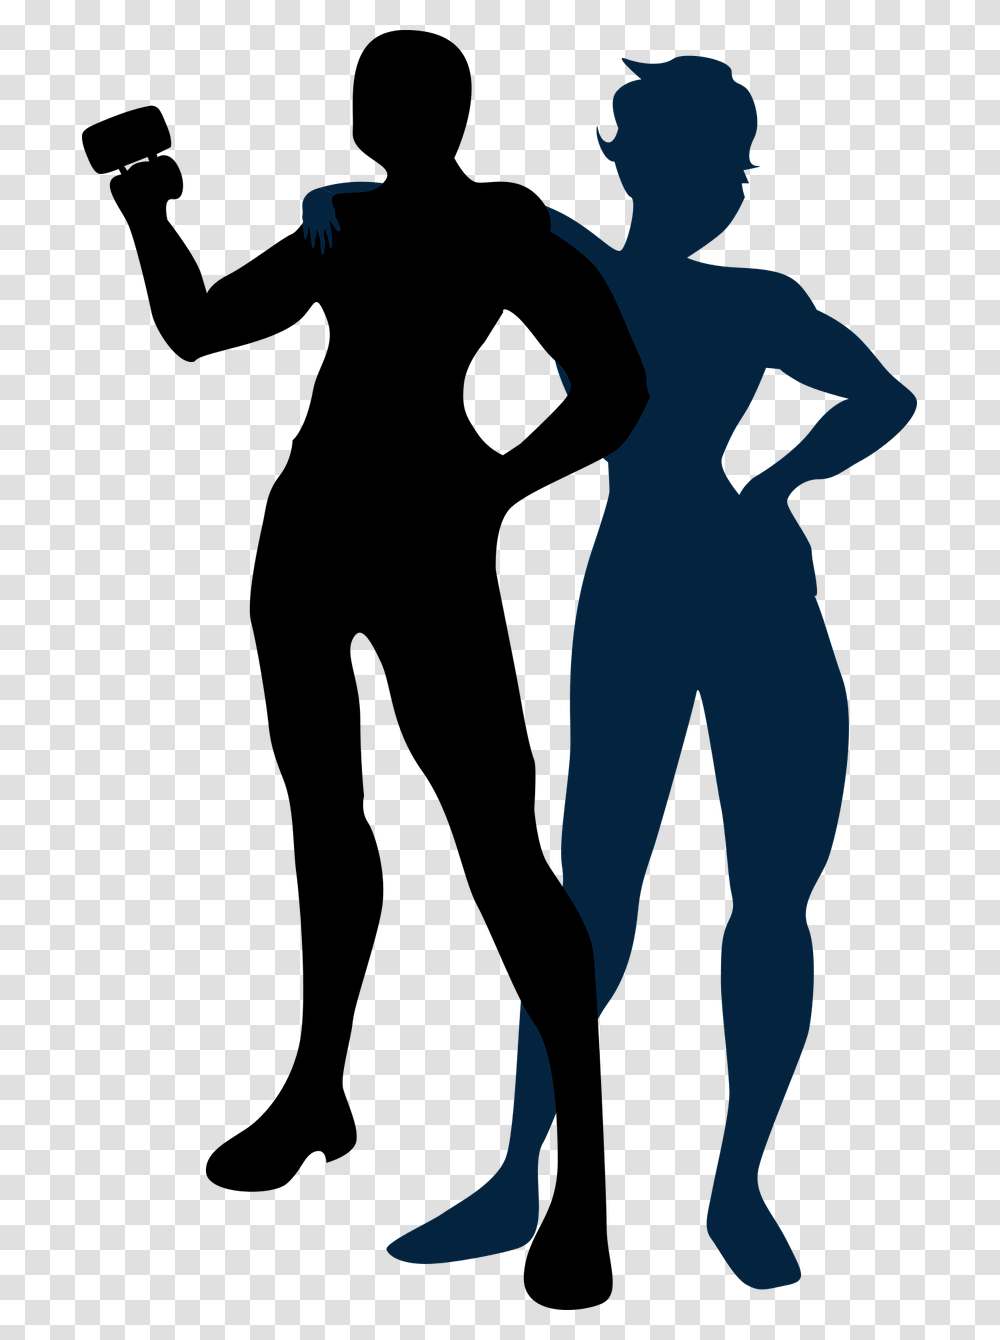 Man With Cup Silhouette Man And Woman Silhouette Couple, Person, Dance Pose, Leisure Activities Transparent Png